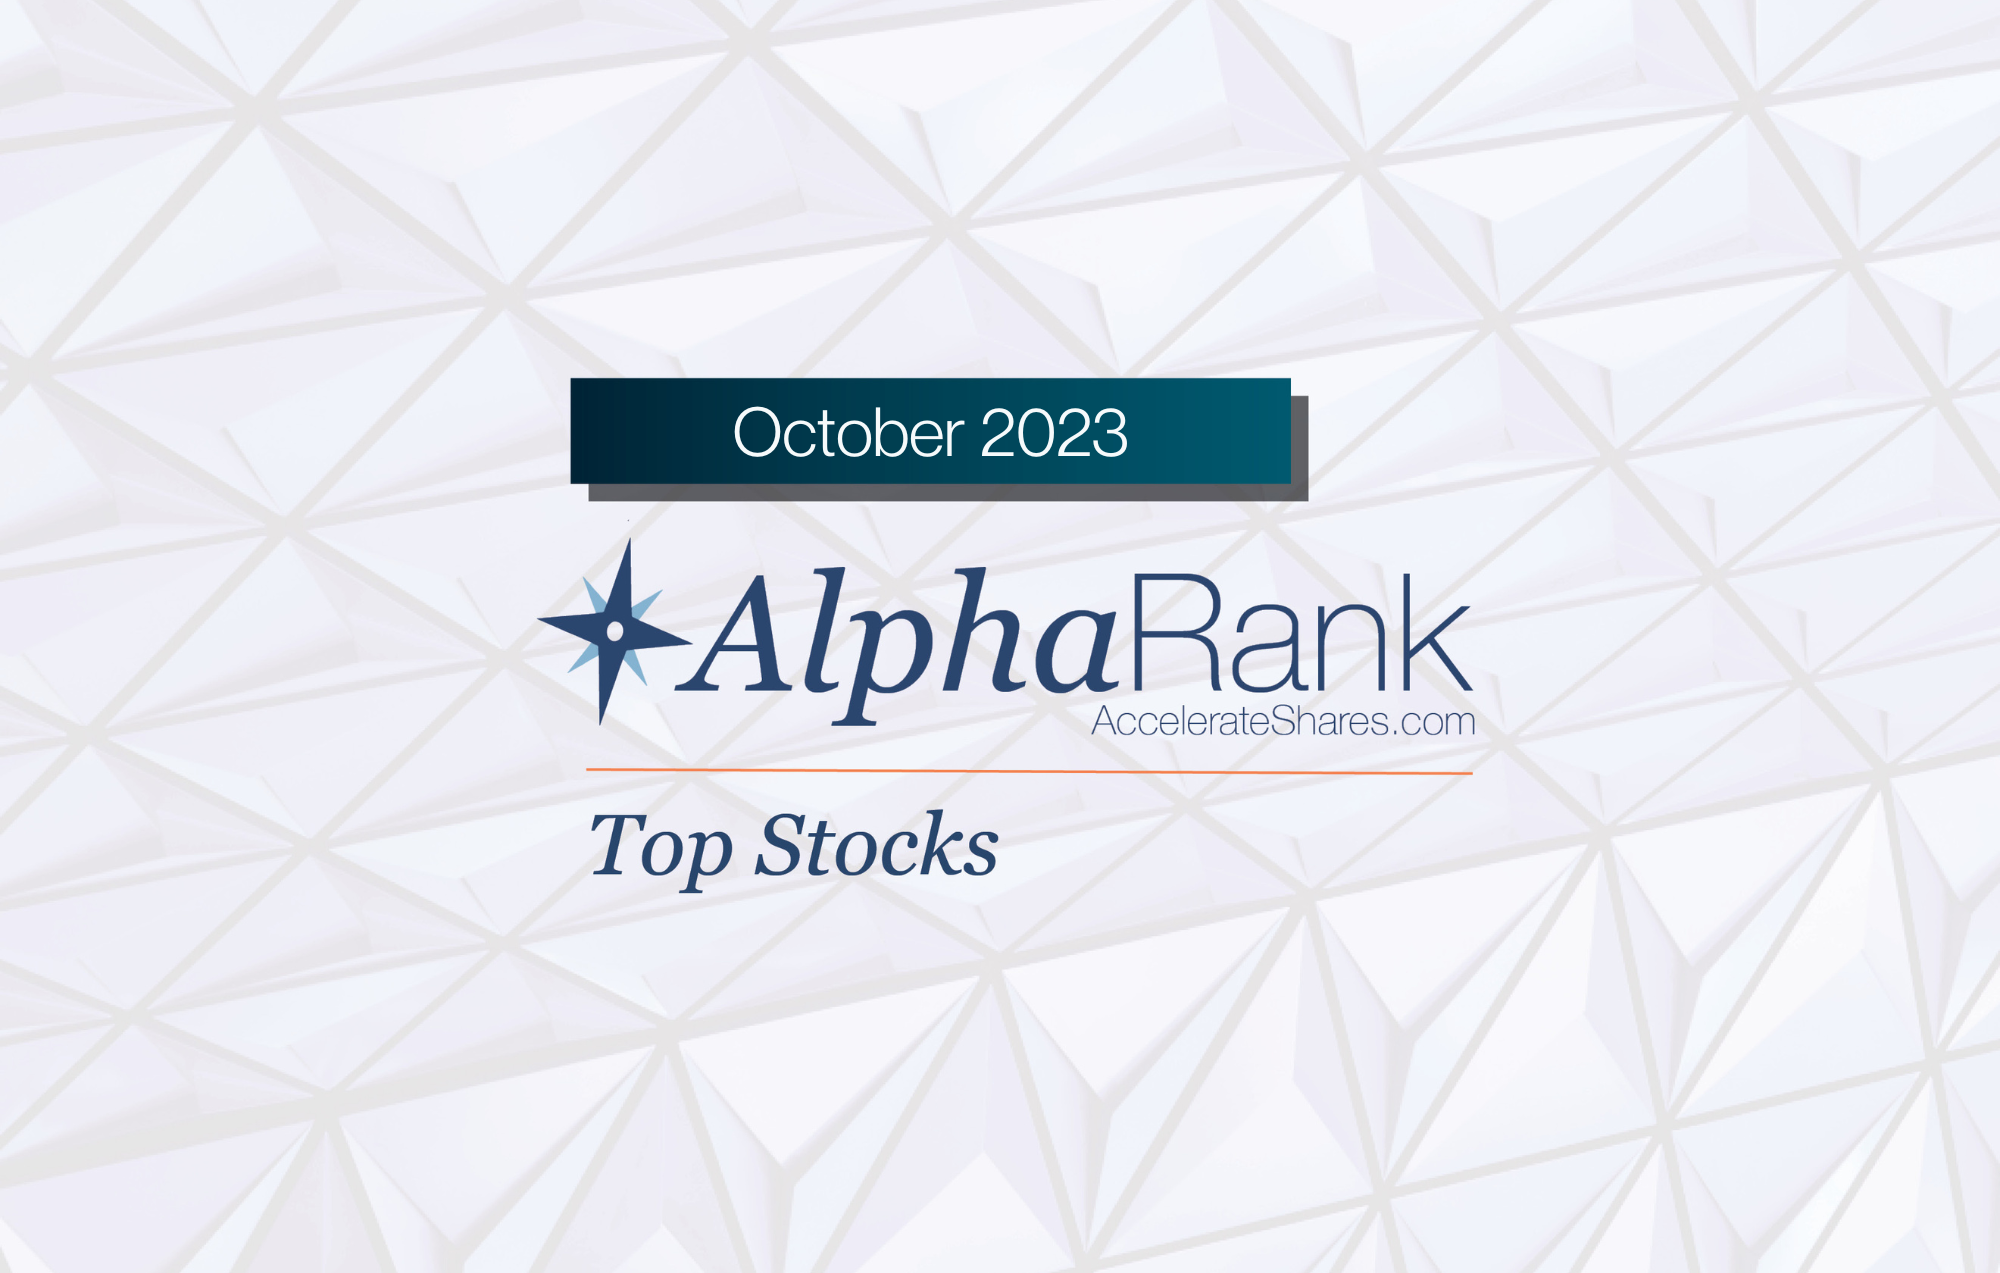 Actionable Stock Ideas – AlphaRank Top Stocks for October